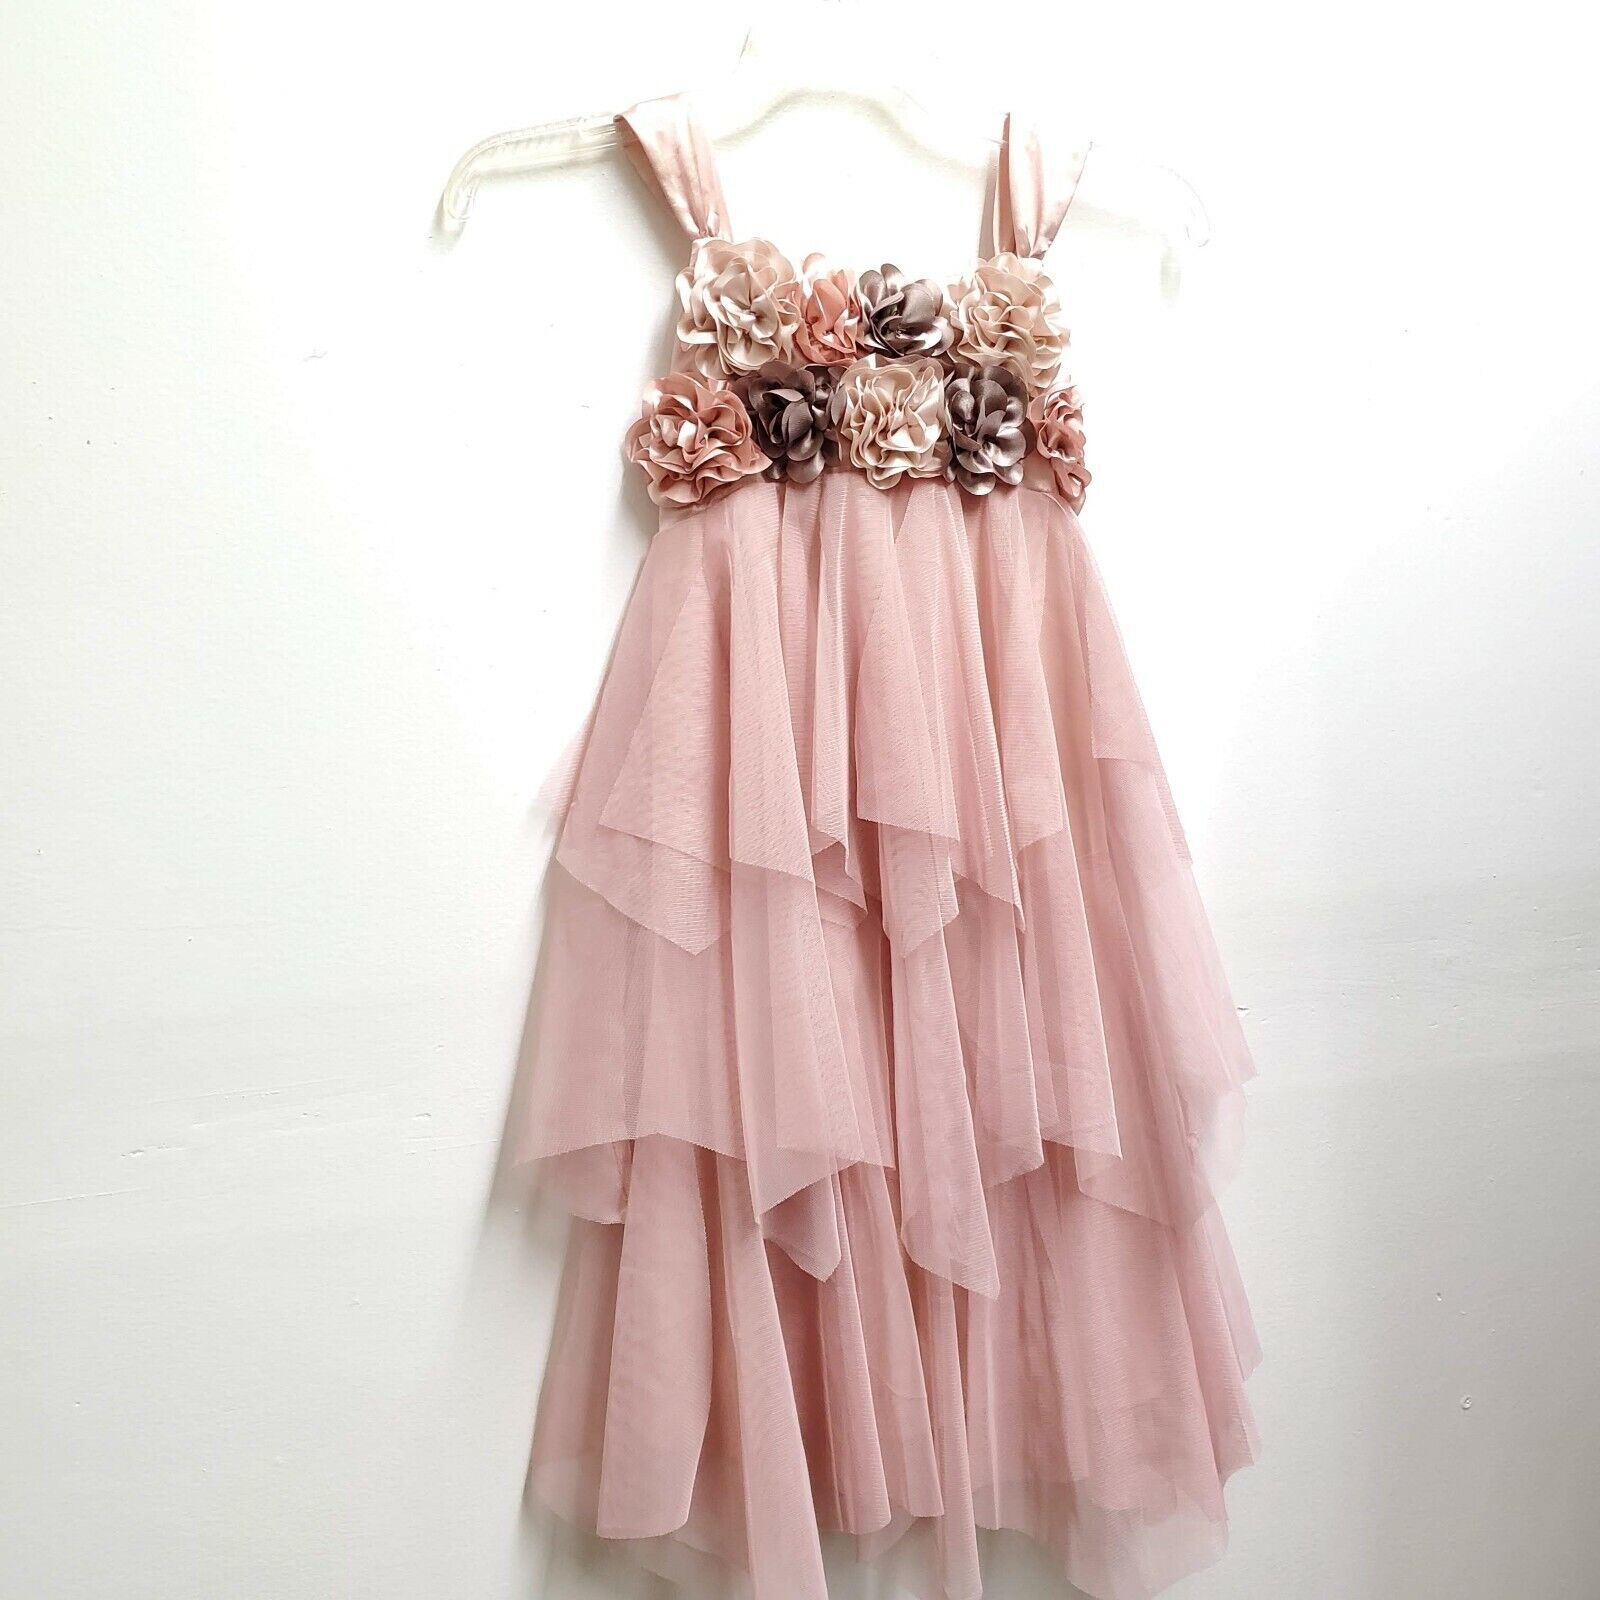 Girls pink Biscotti collection dress size 7 silky flowers tiered ruffles